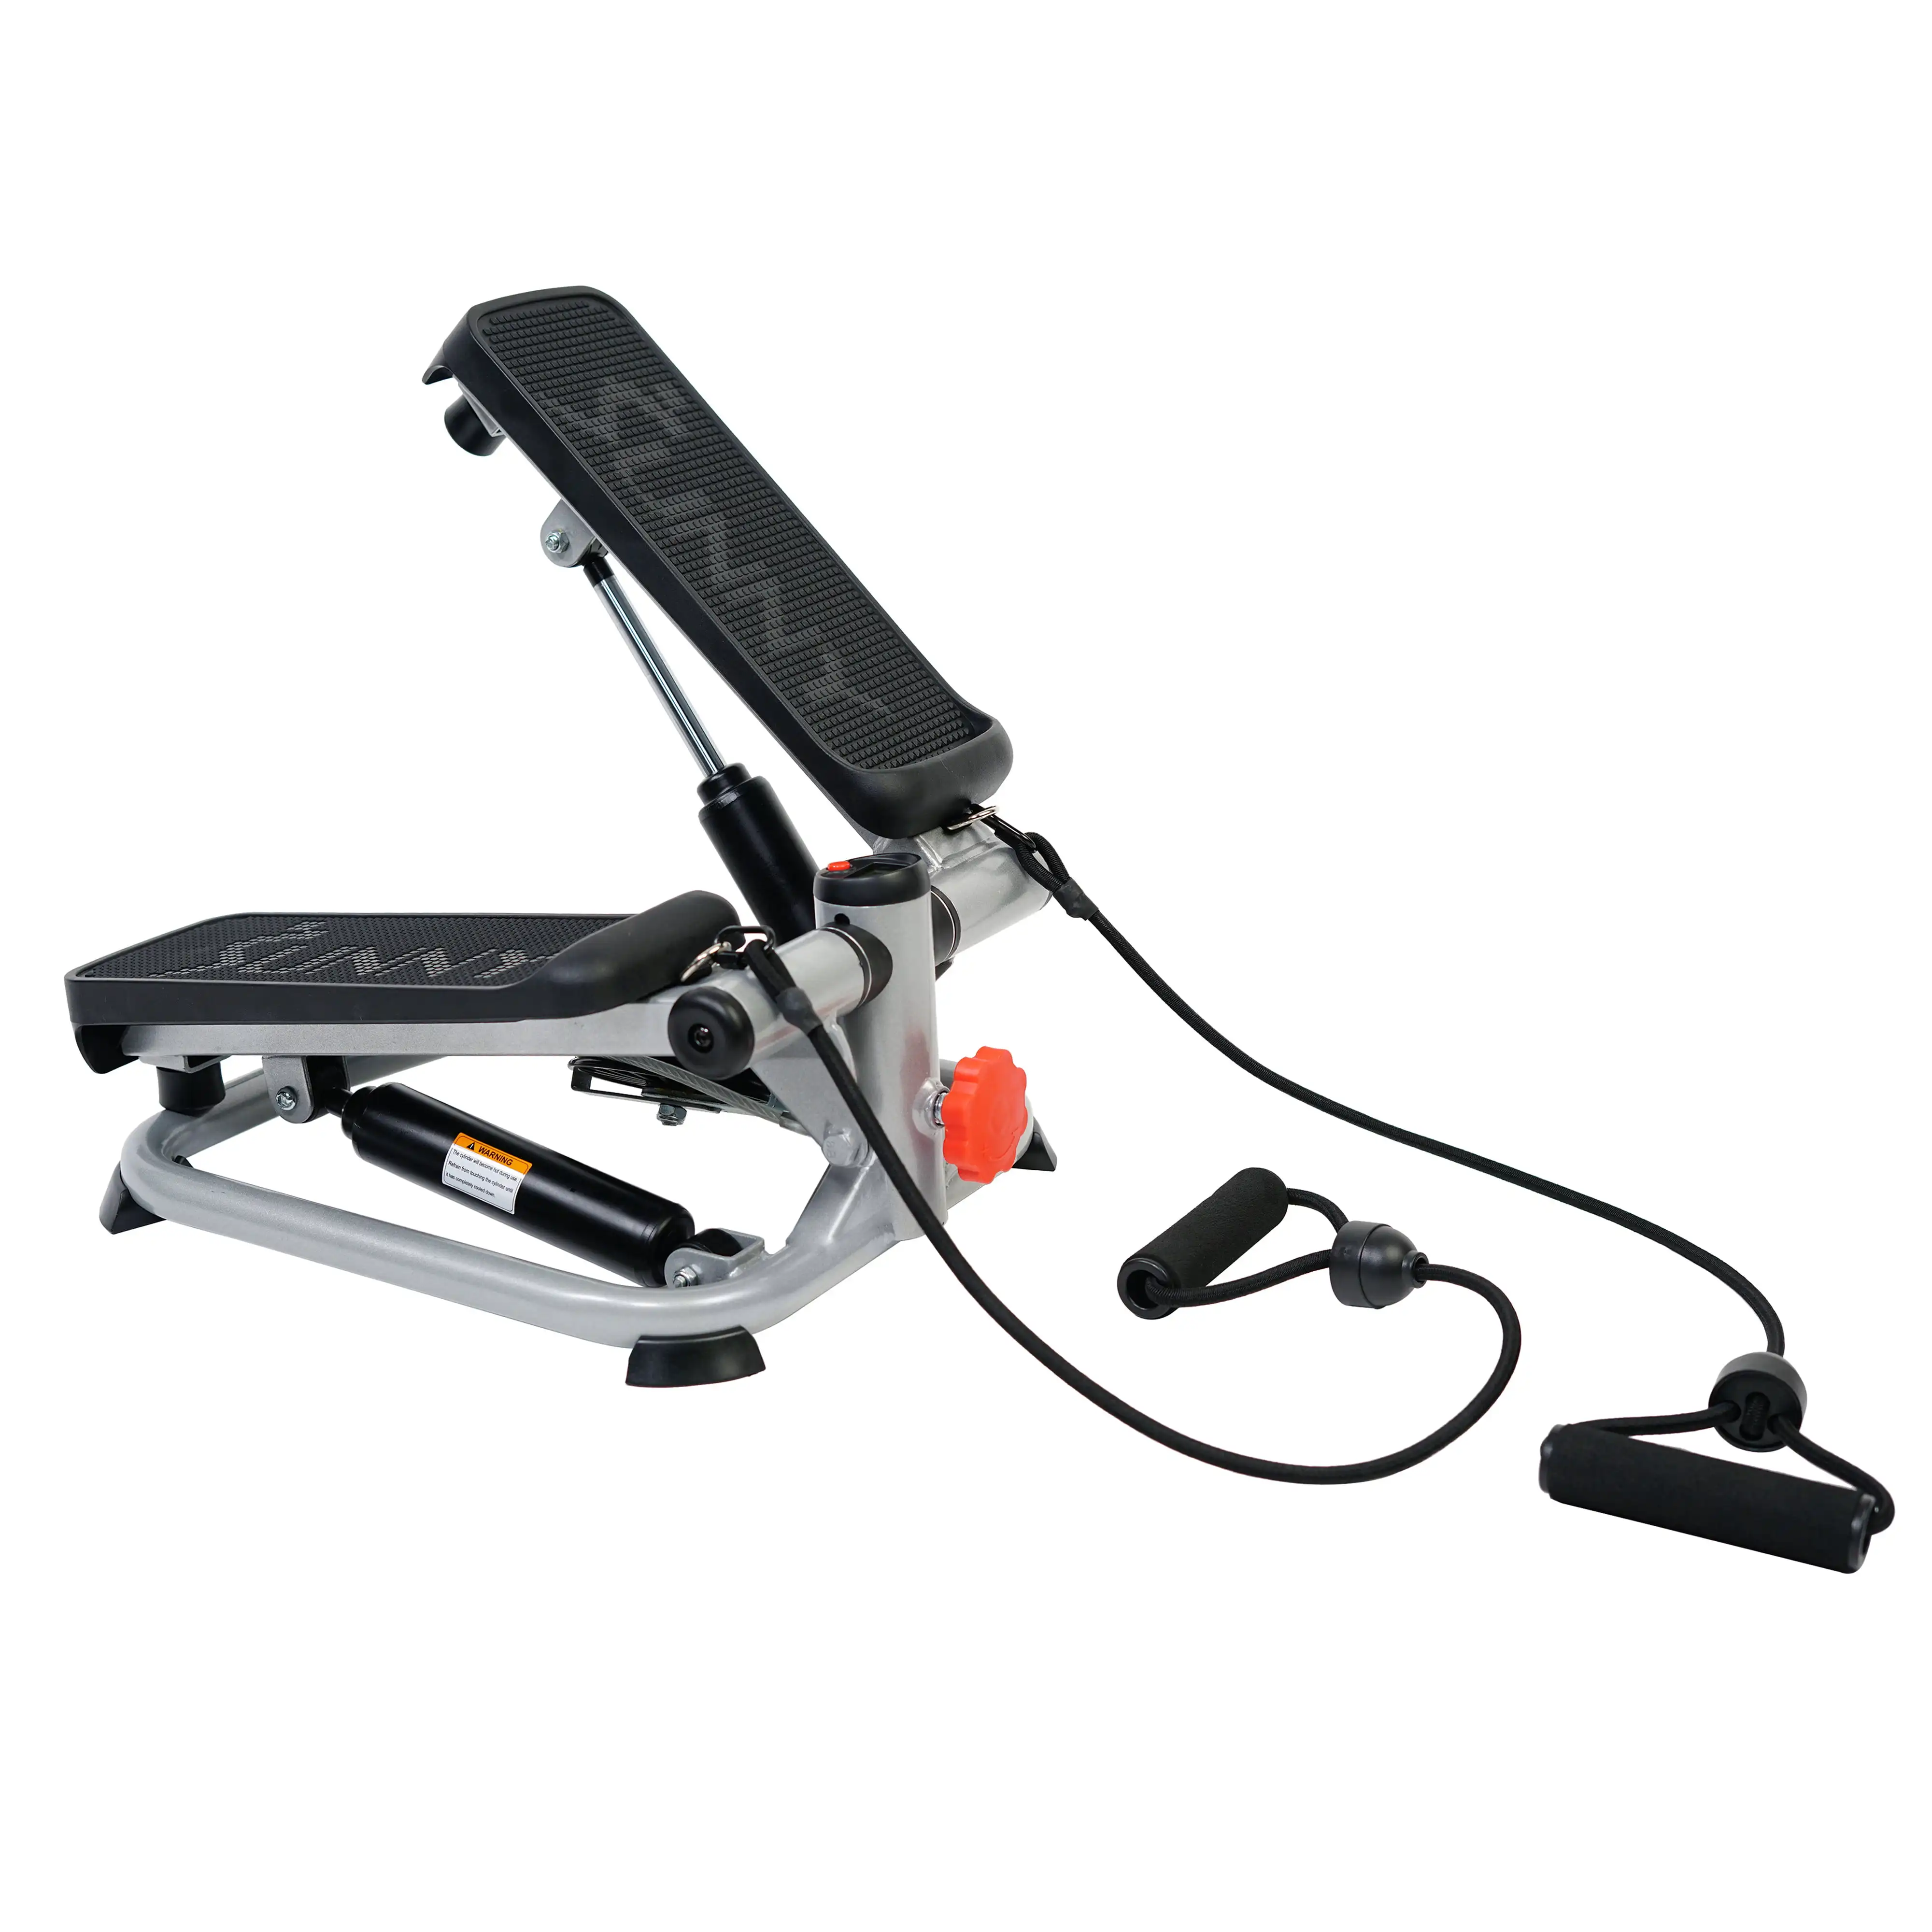 Portable Total Body Exercise Mini Stair Stepper, Climber Machine, Compact Inmotion Workout, SF-S0978